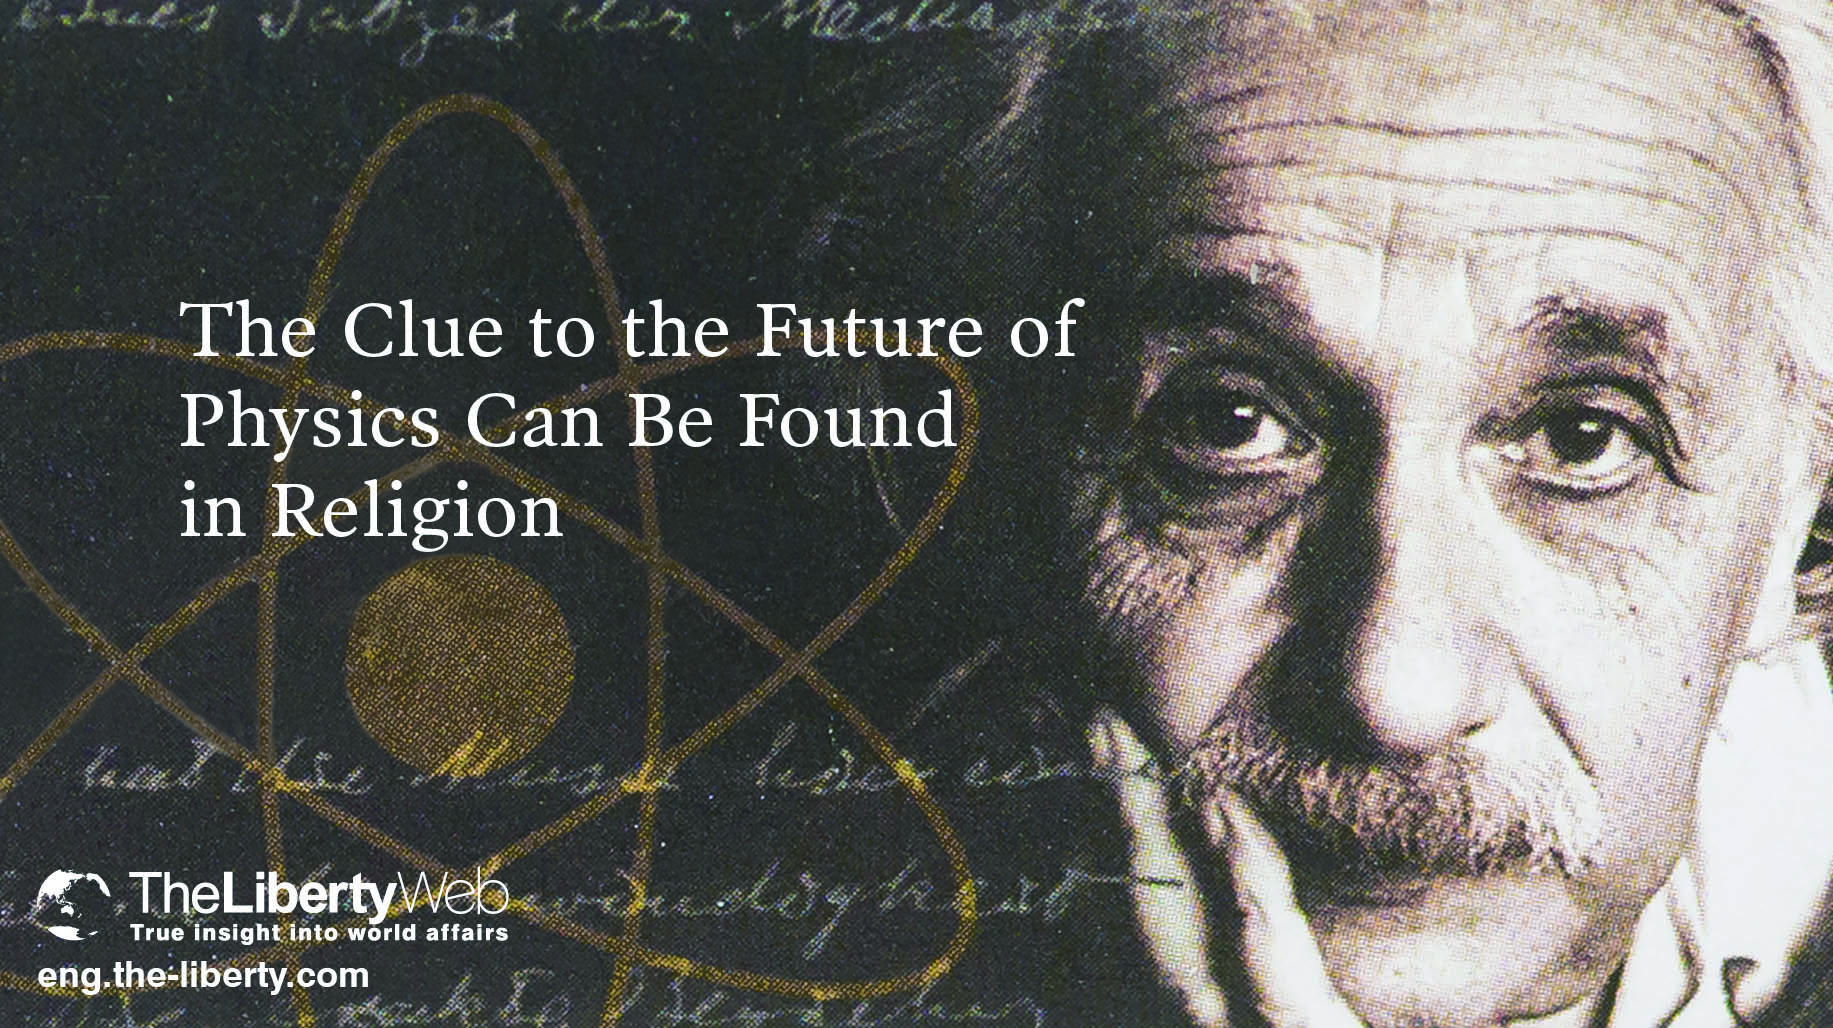 The Clue to the Future of Physics Can be Found in Religion/The Liberty